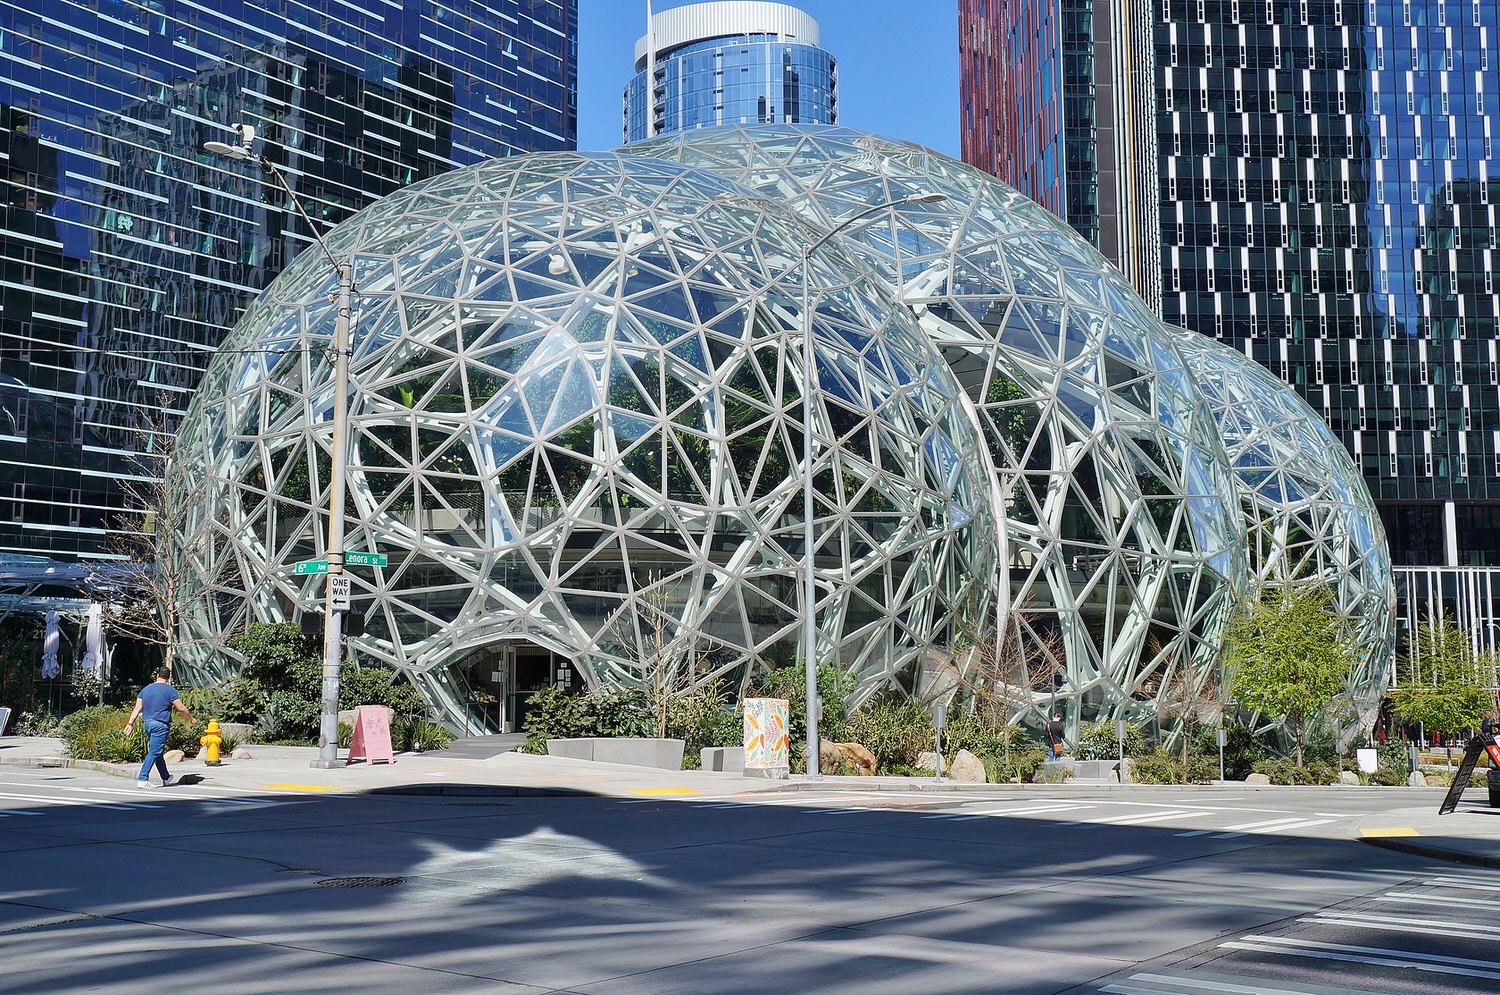 Amazon Spheres from 6th Avenue April 2020